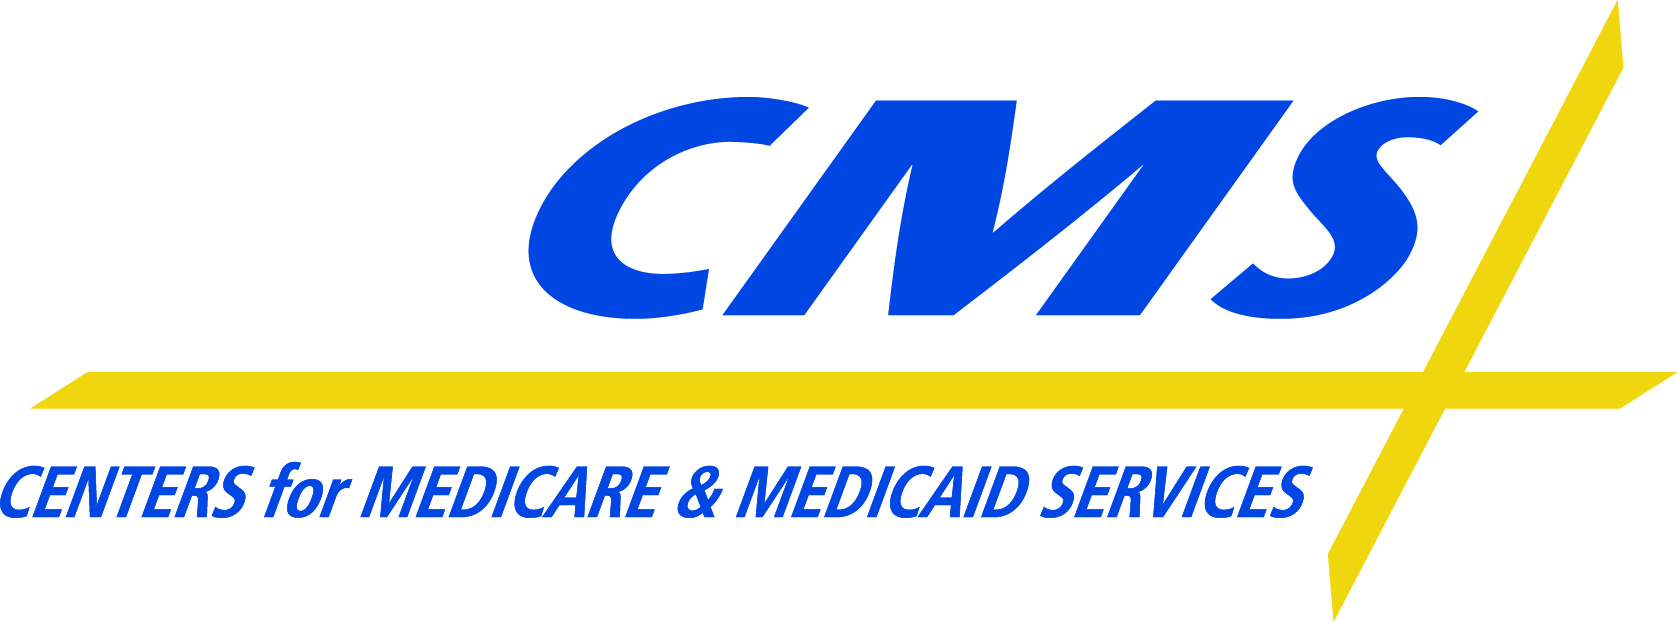 Centers for medicare and medicaid services legit cigna open access plus hmo or carefirst choice hmo